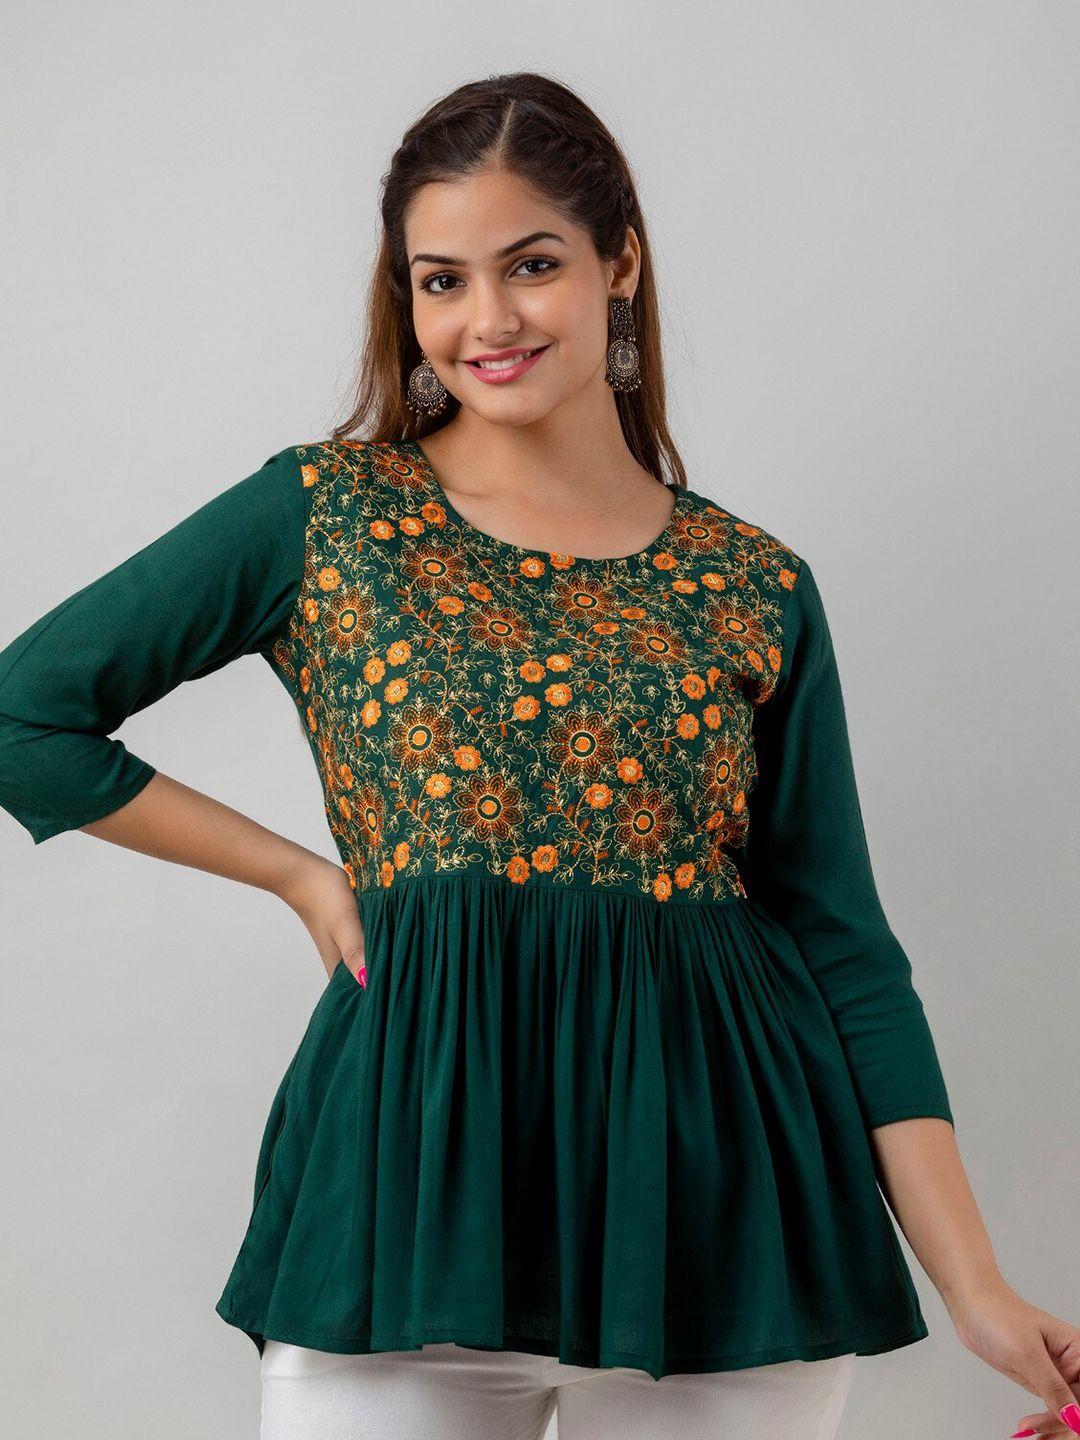 women-touch-floral-embroidered-round-neck-top